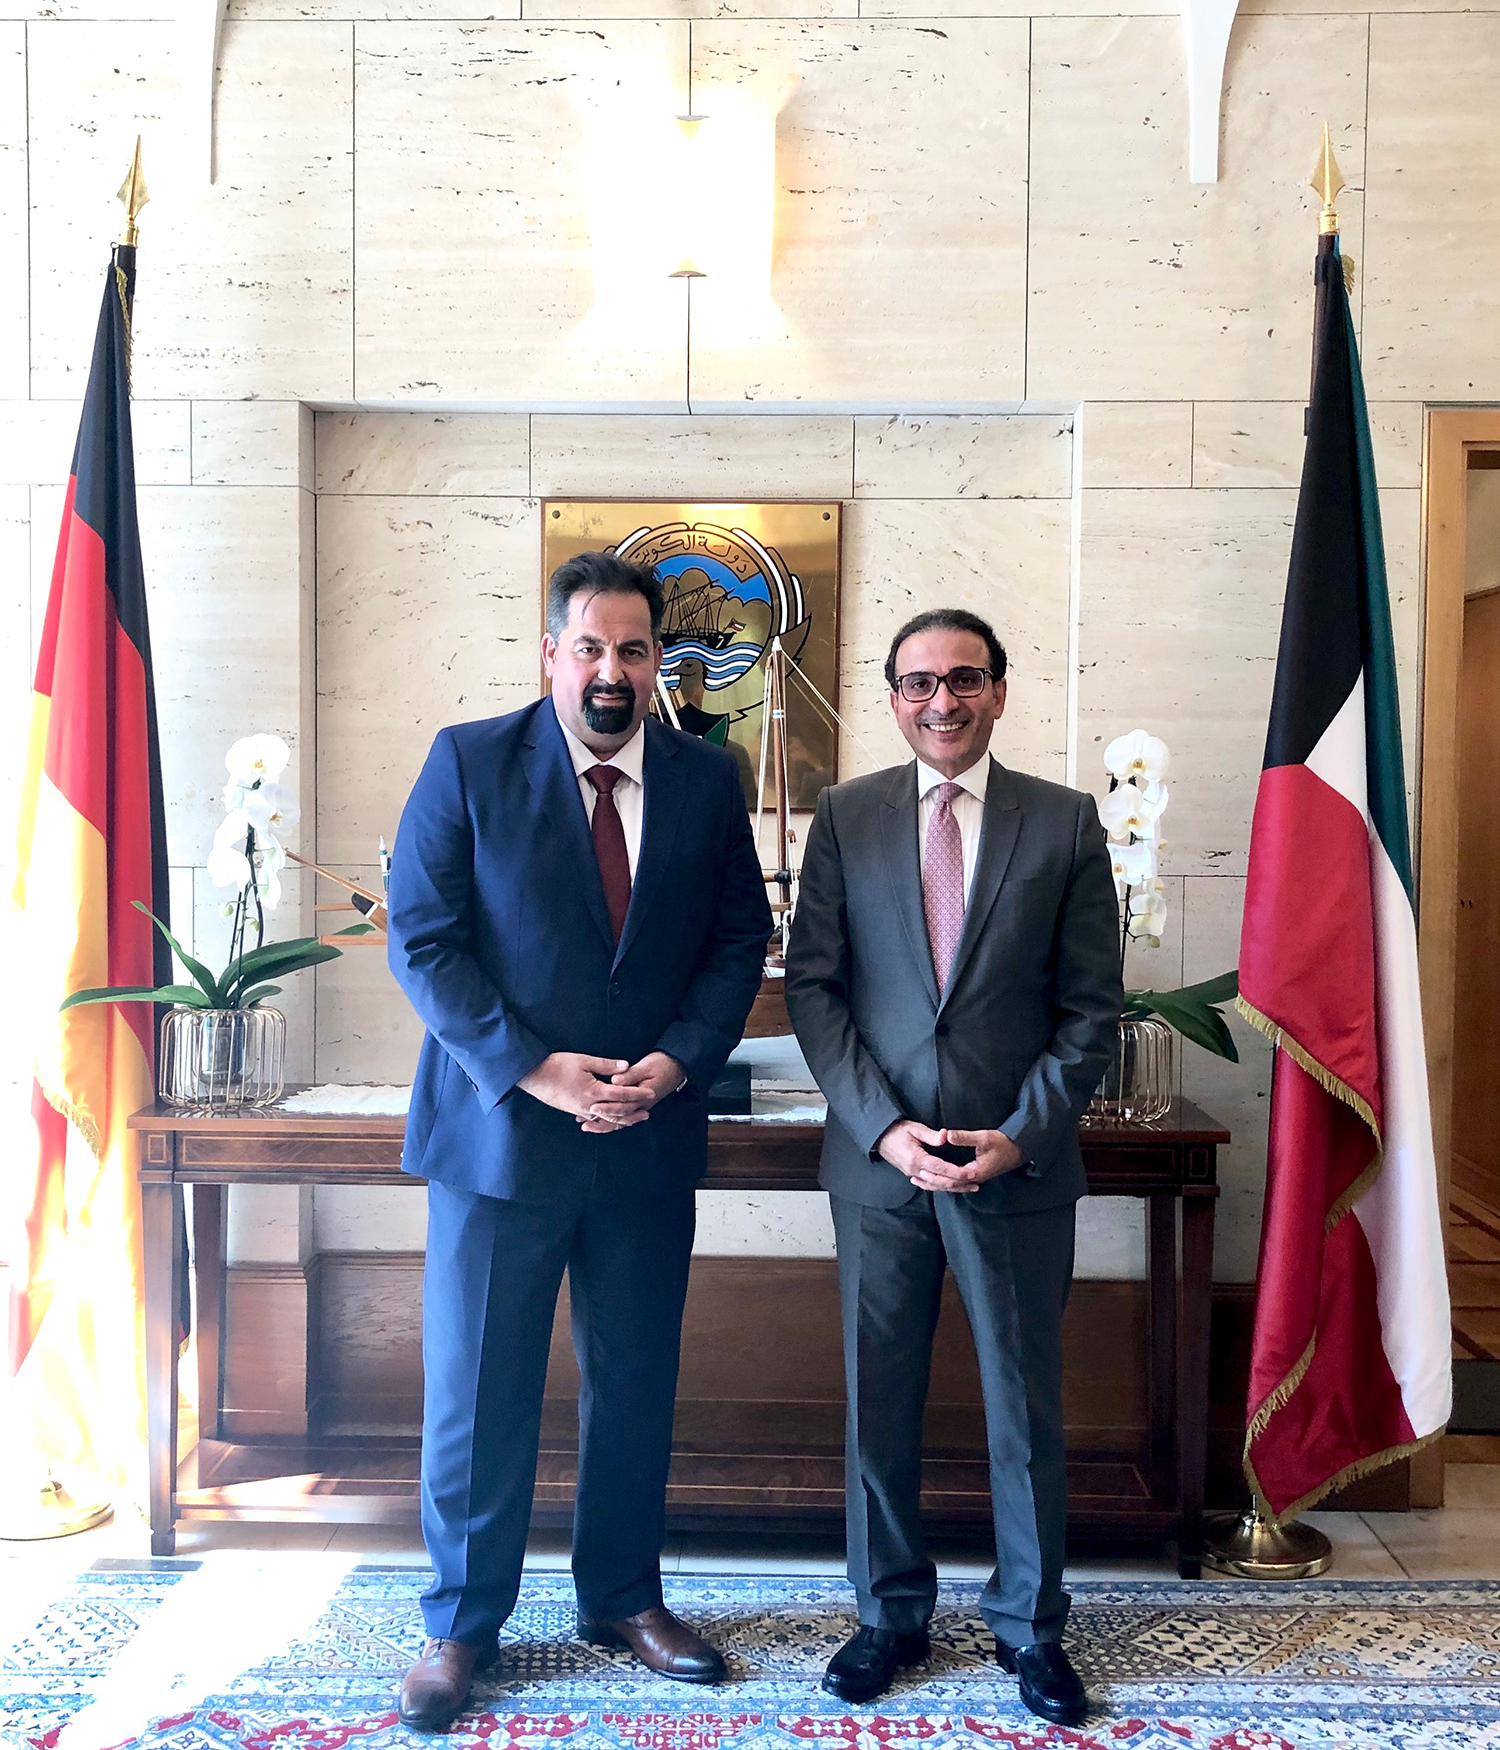 President of the Central Council of Muslims in Germany with the Kuwaiti ambassador to Germany